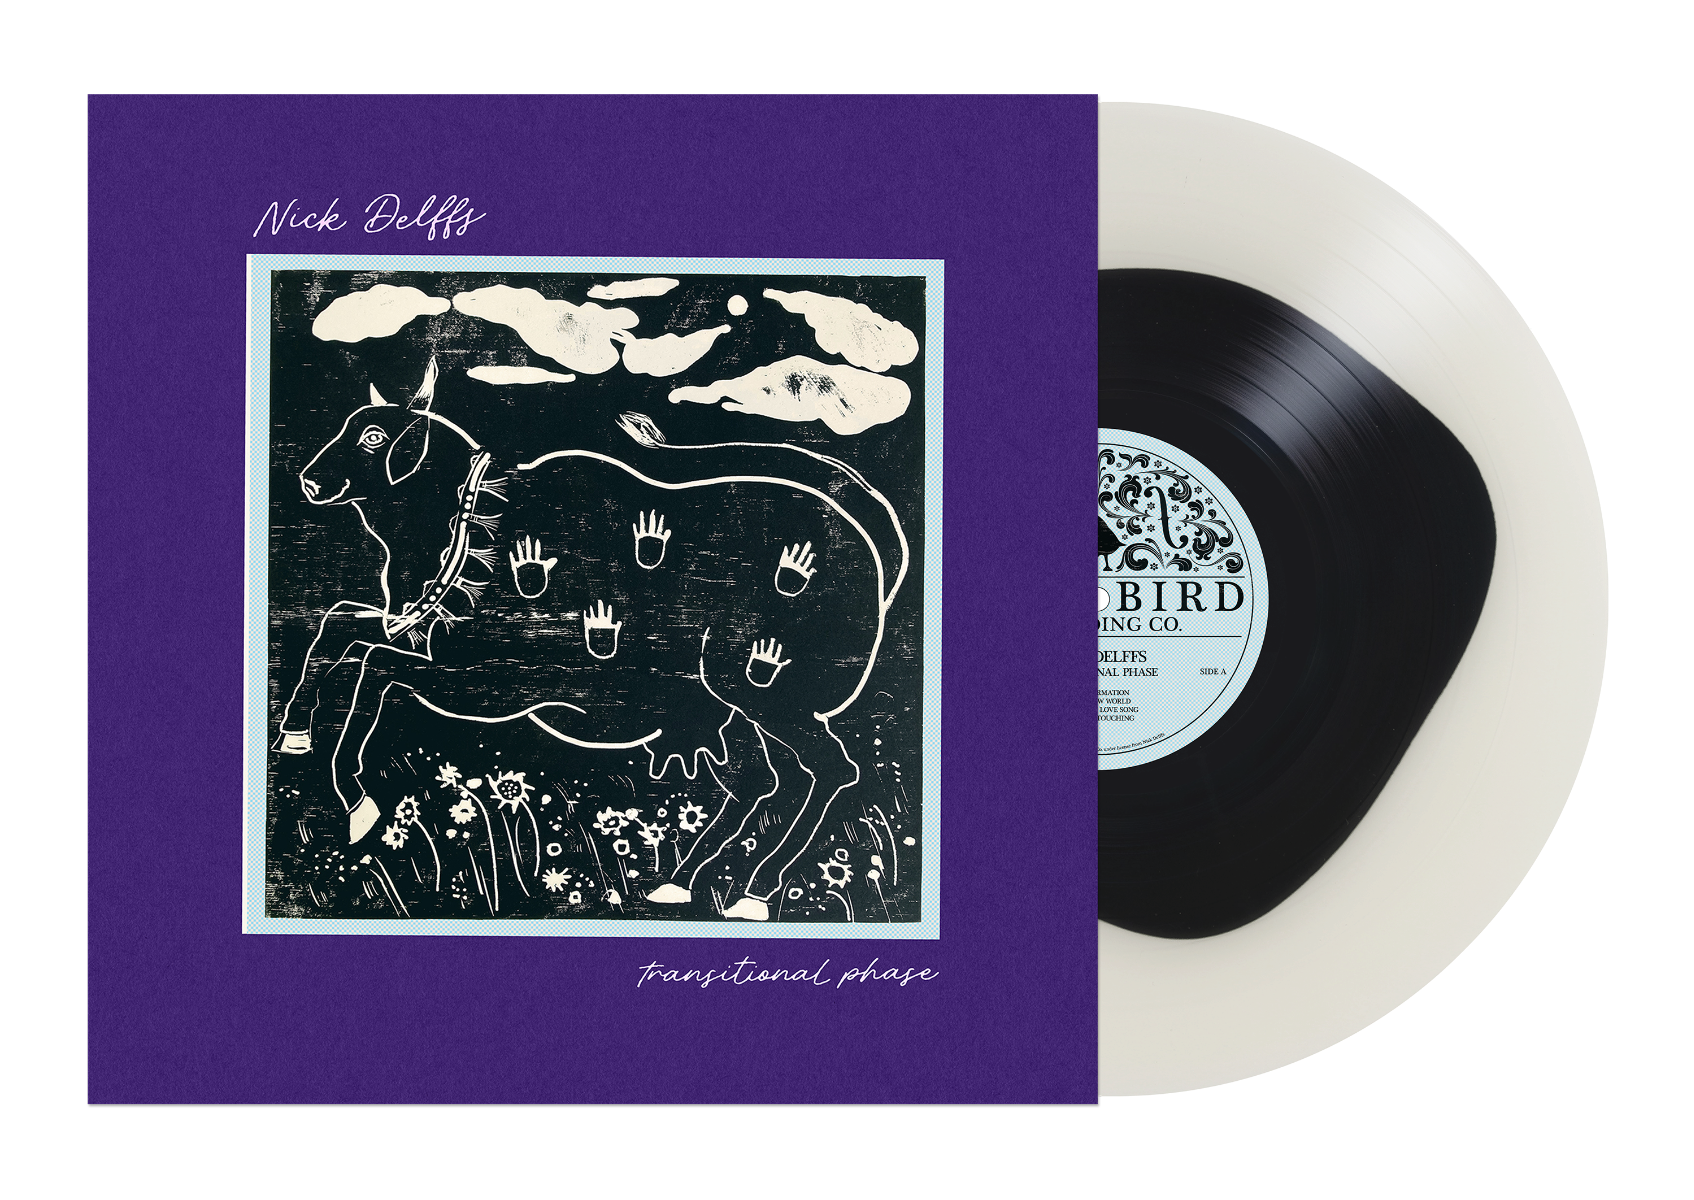 Nick Delffs | Transitional Phase (Indie Exclusive, "Holy Cow" Black & White Colored Vinyl) | Vinyl